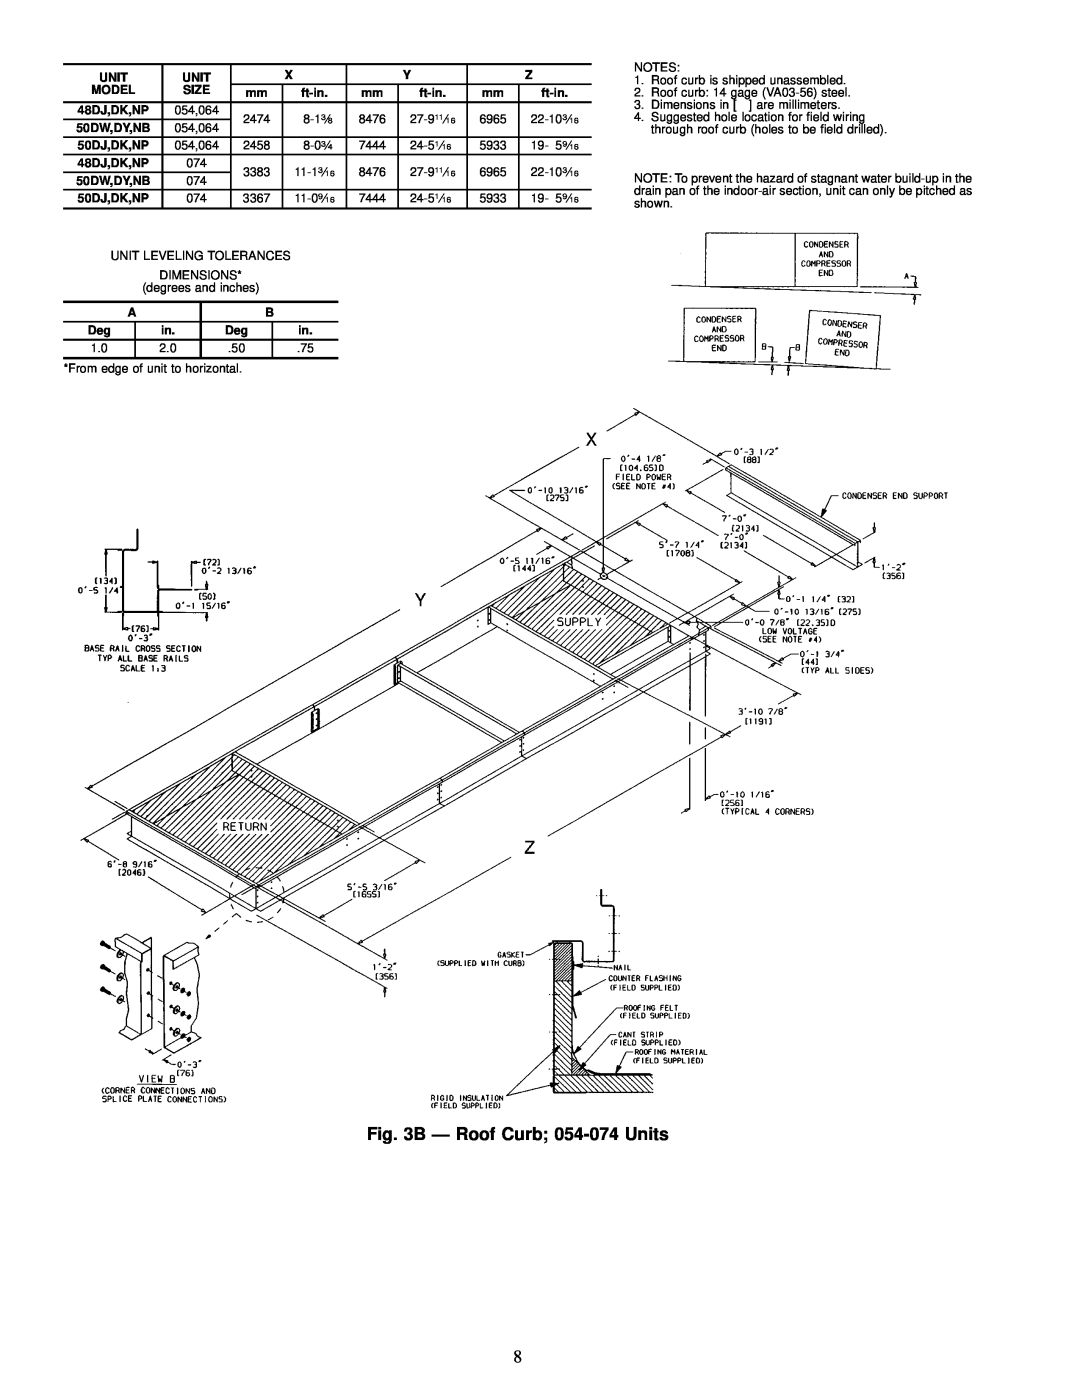 Carrier NP034-074 specifications B Ð Roof Curb; 054-074Units 